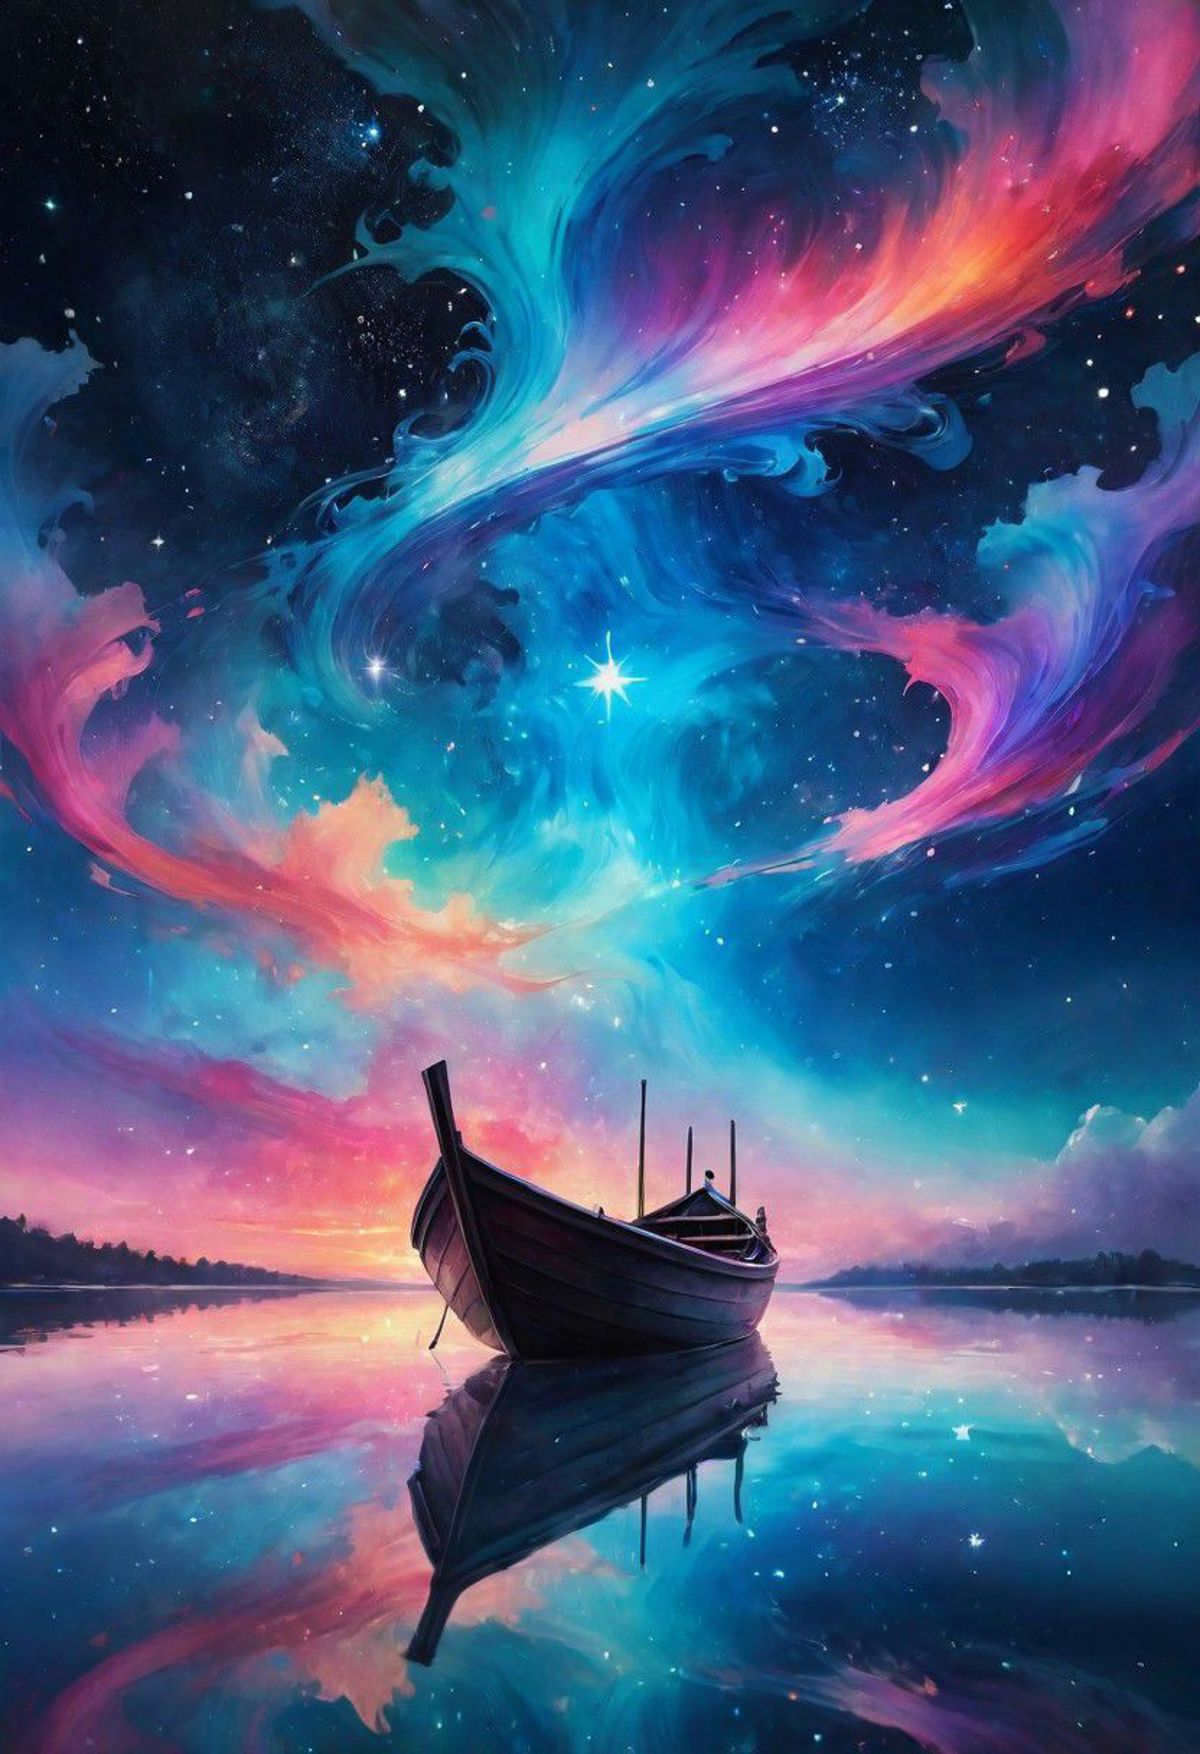 A painting of a boat on a lake at sunset with a starry sky.